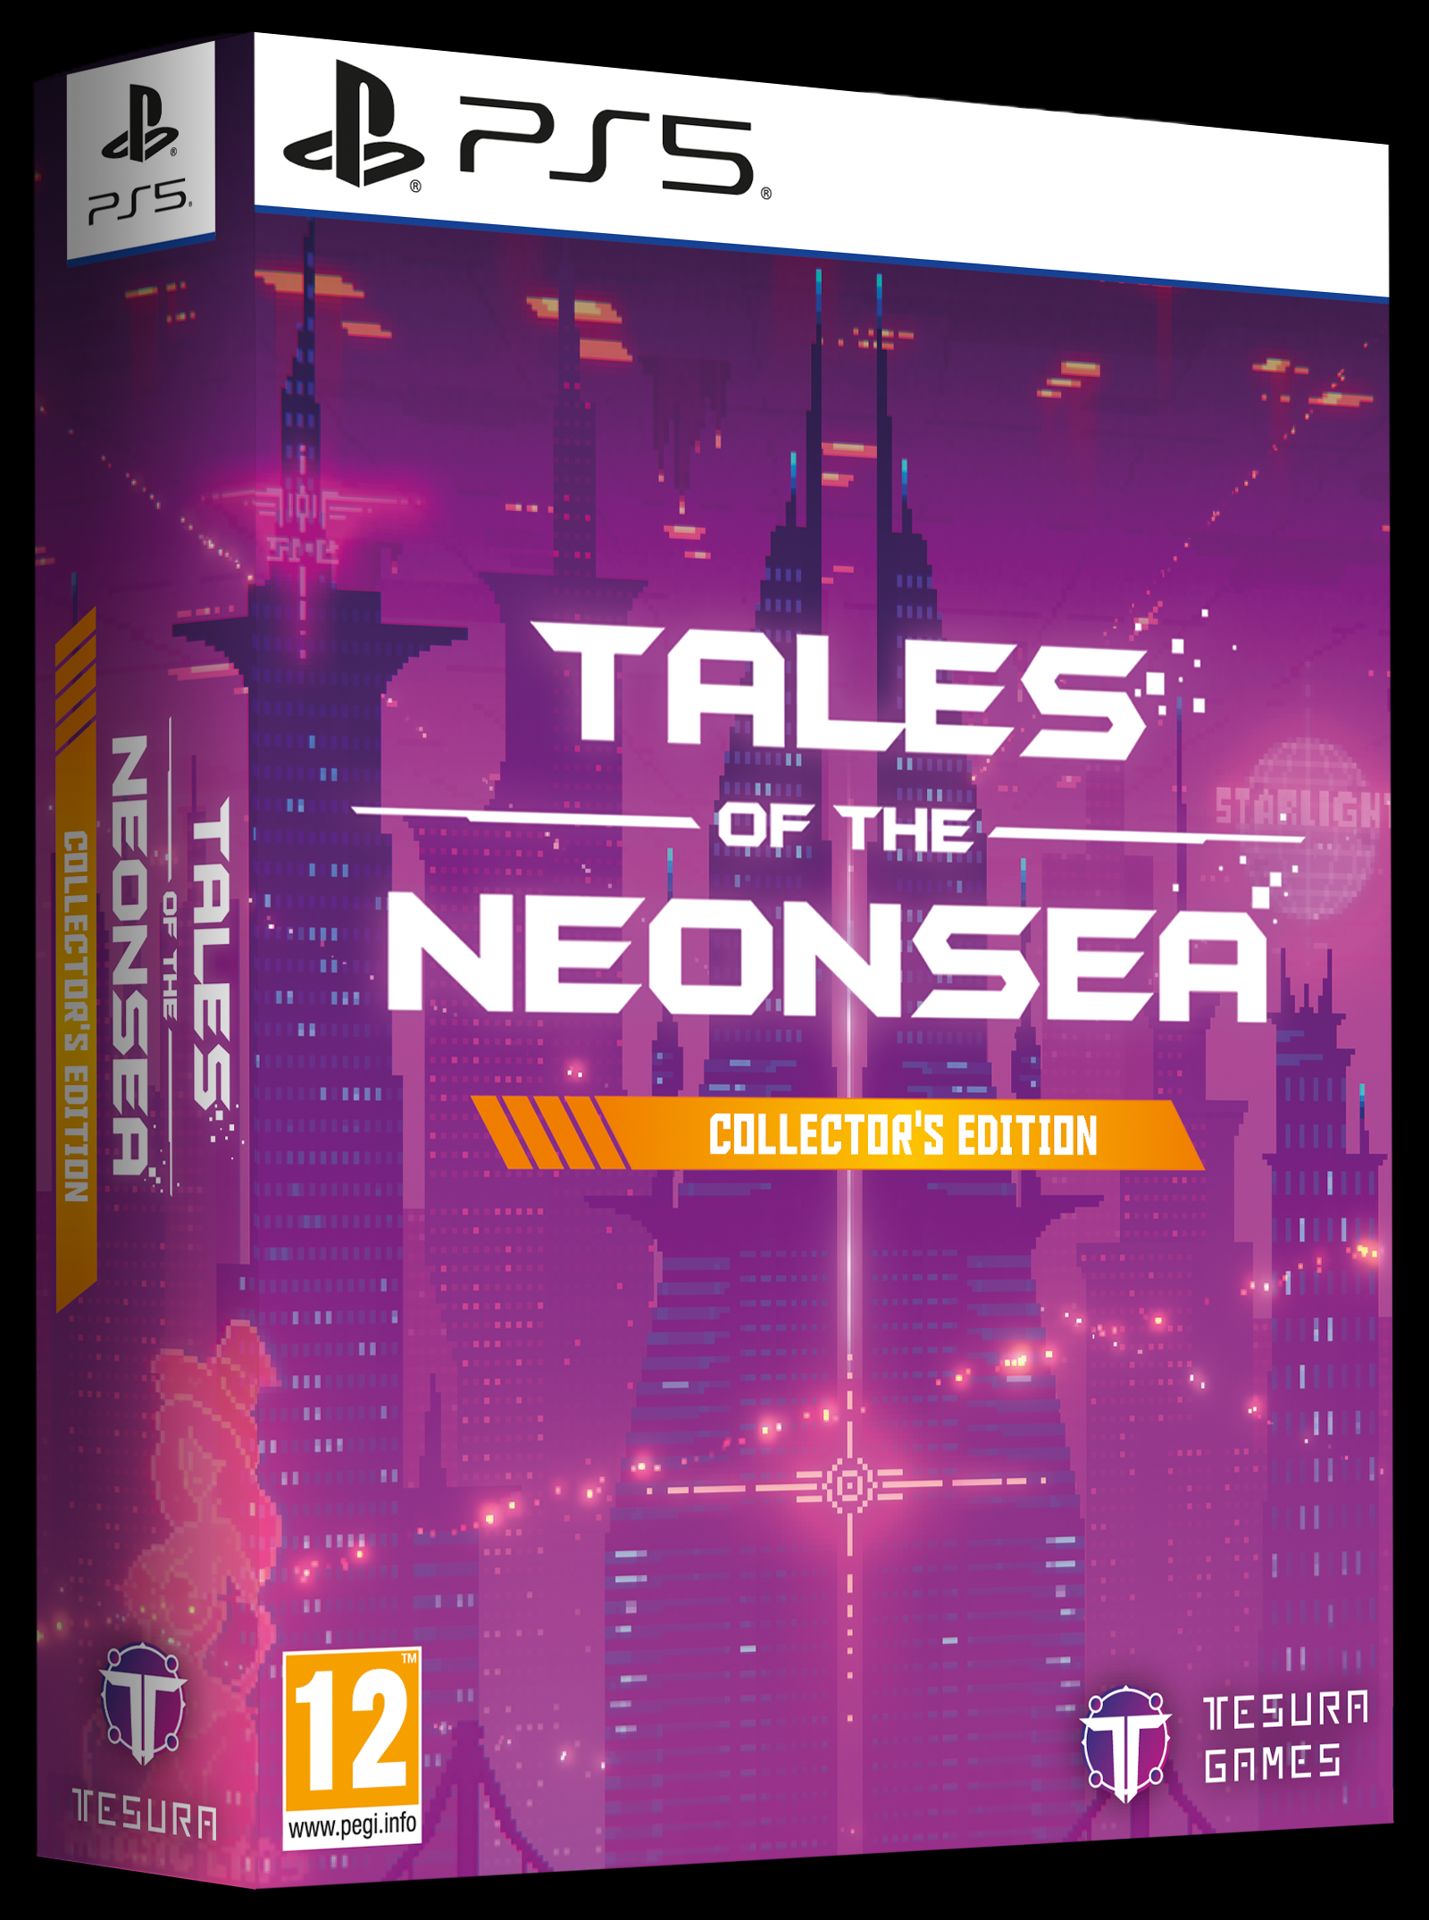 TALES OF THE NEON SEA - collector edition